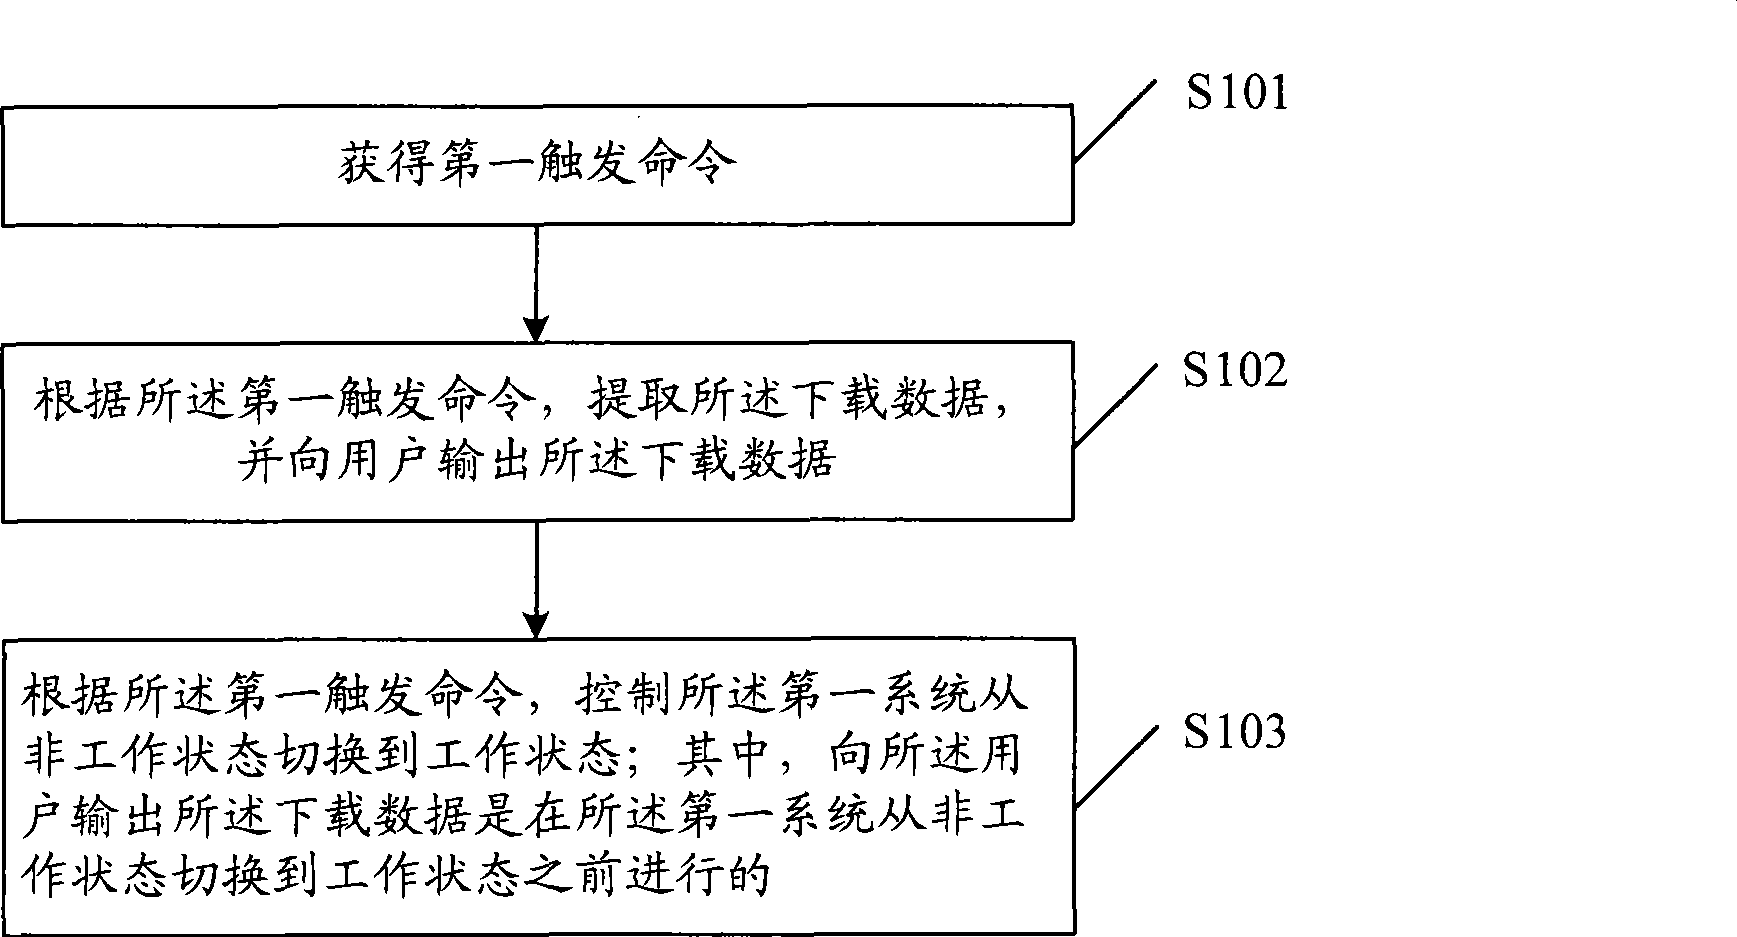 Method and device for providing information service